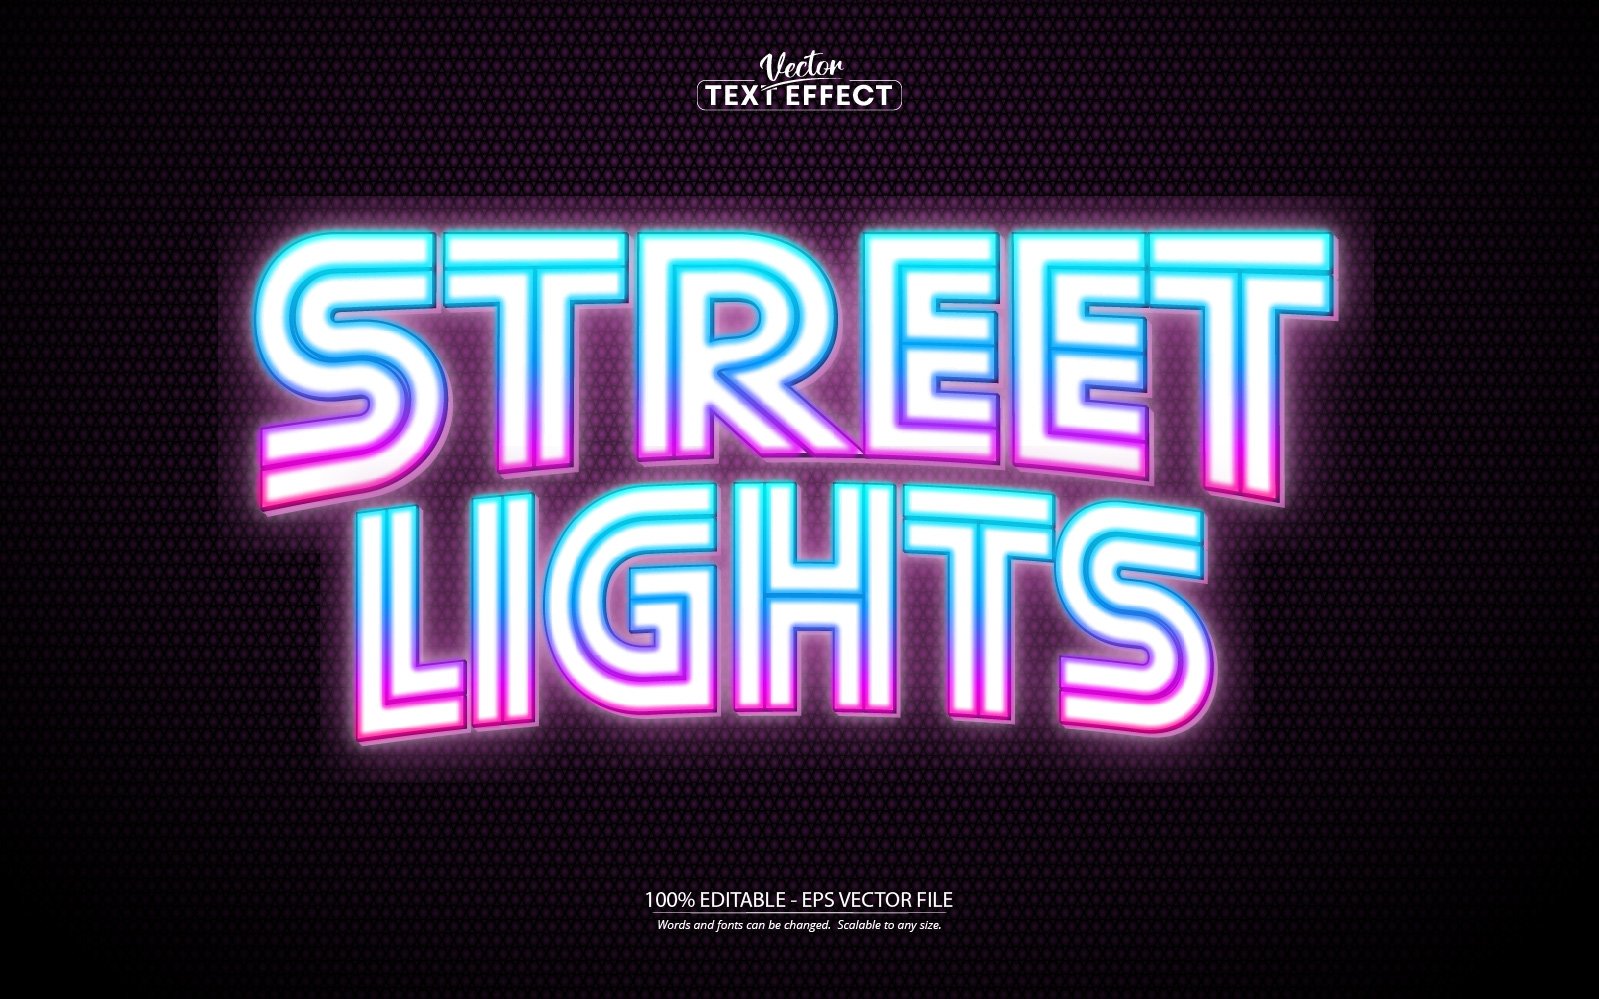 Street Lights - Editable Text Effect, Colorful Neon Lights Text Style, Graphics Illustration